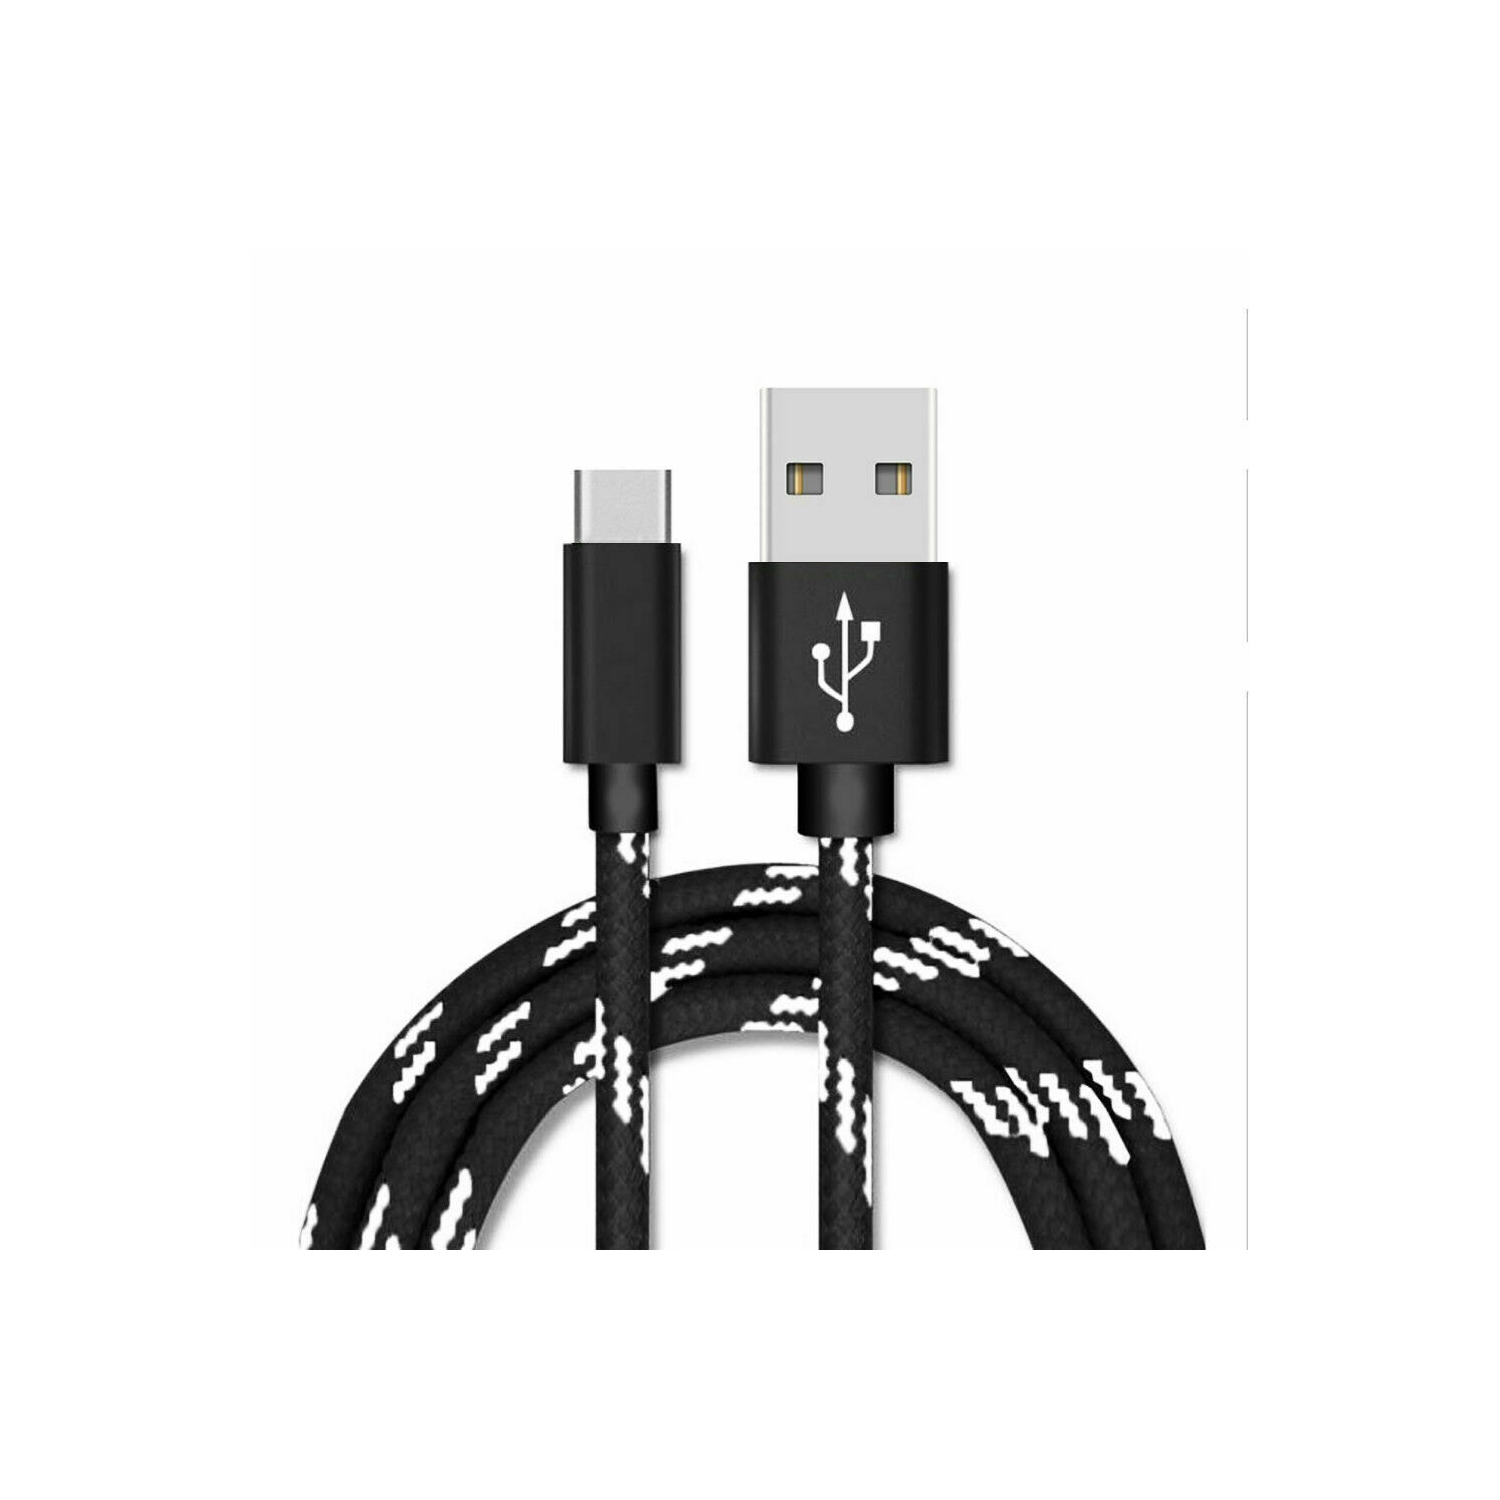 USB Type C Cable, Premium USB C Charging Cable 3FT, USB-C to USB-A Fast Charging Cable Compatible with Samsung Galaxy S21 S10 S9 S8 S20 Plus/Ultra A20 A40 A50 A70, LG V20 / G5